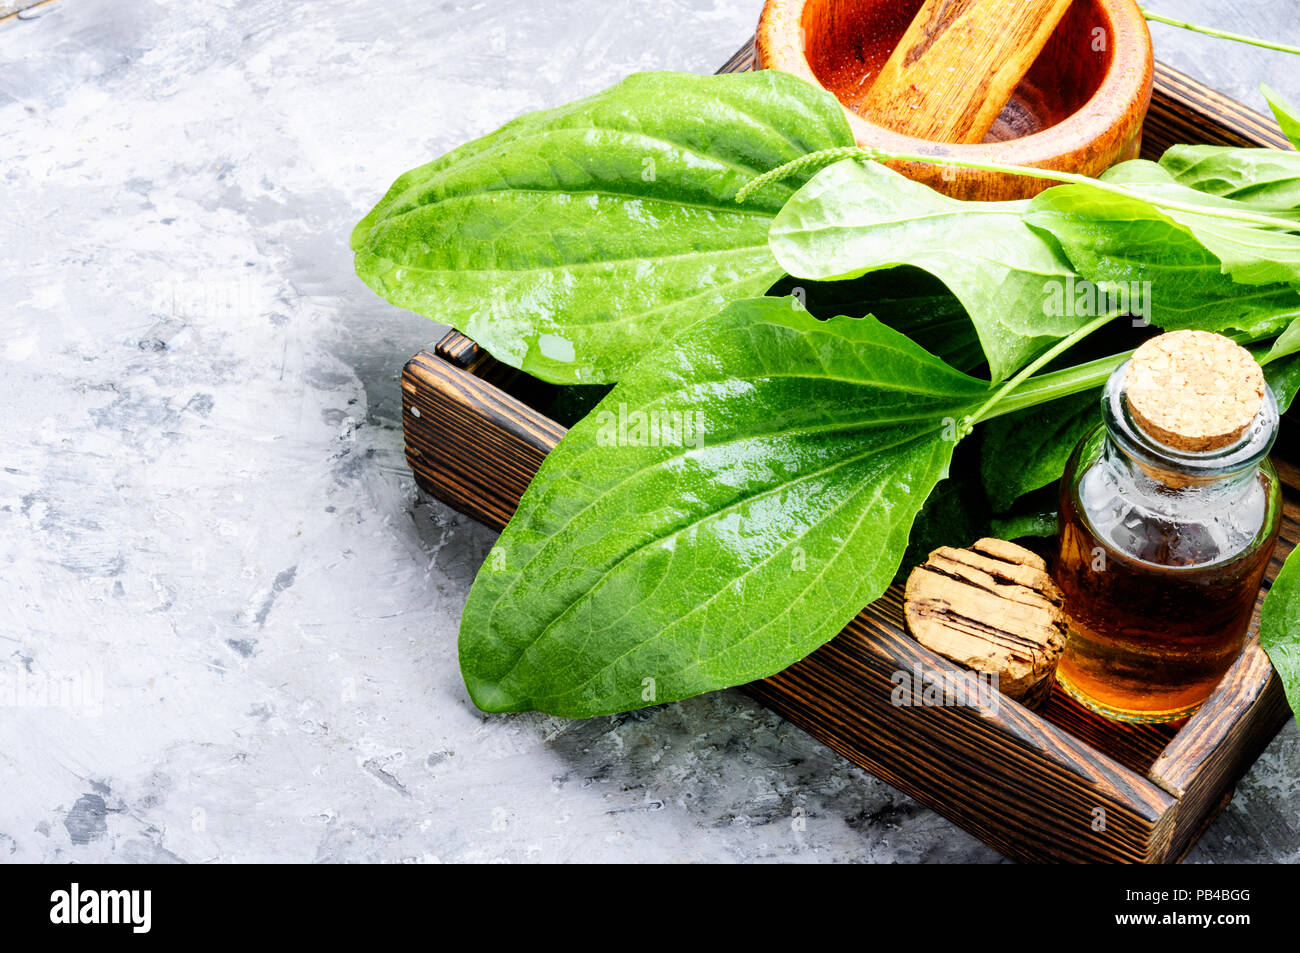 Leaf of greater plantain in a box with pharmaceutical bottle Stock Photo